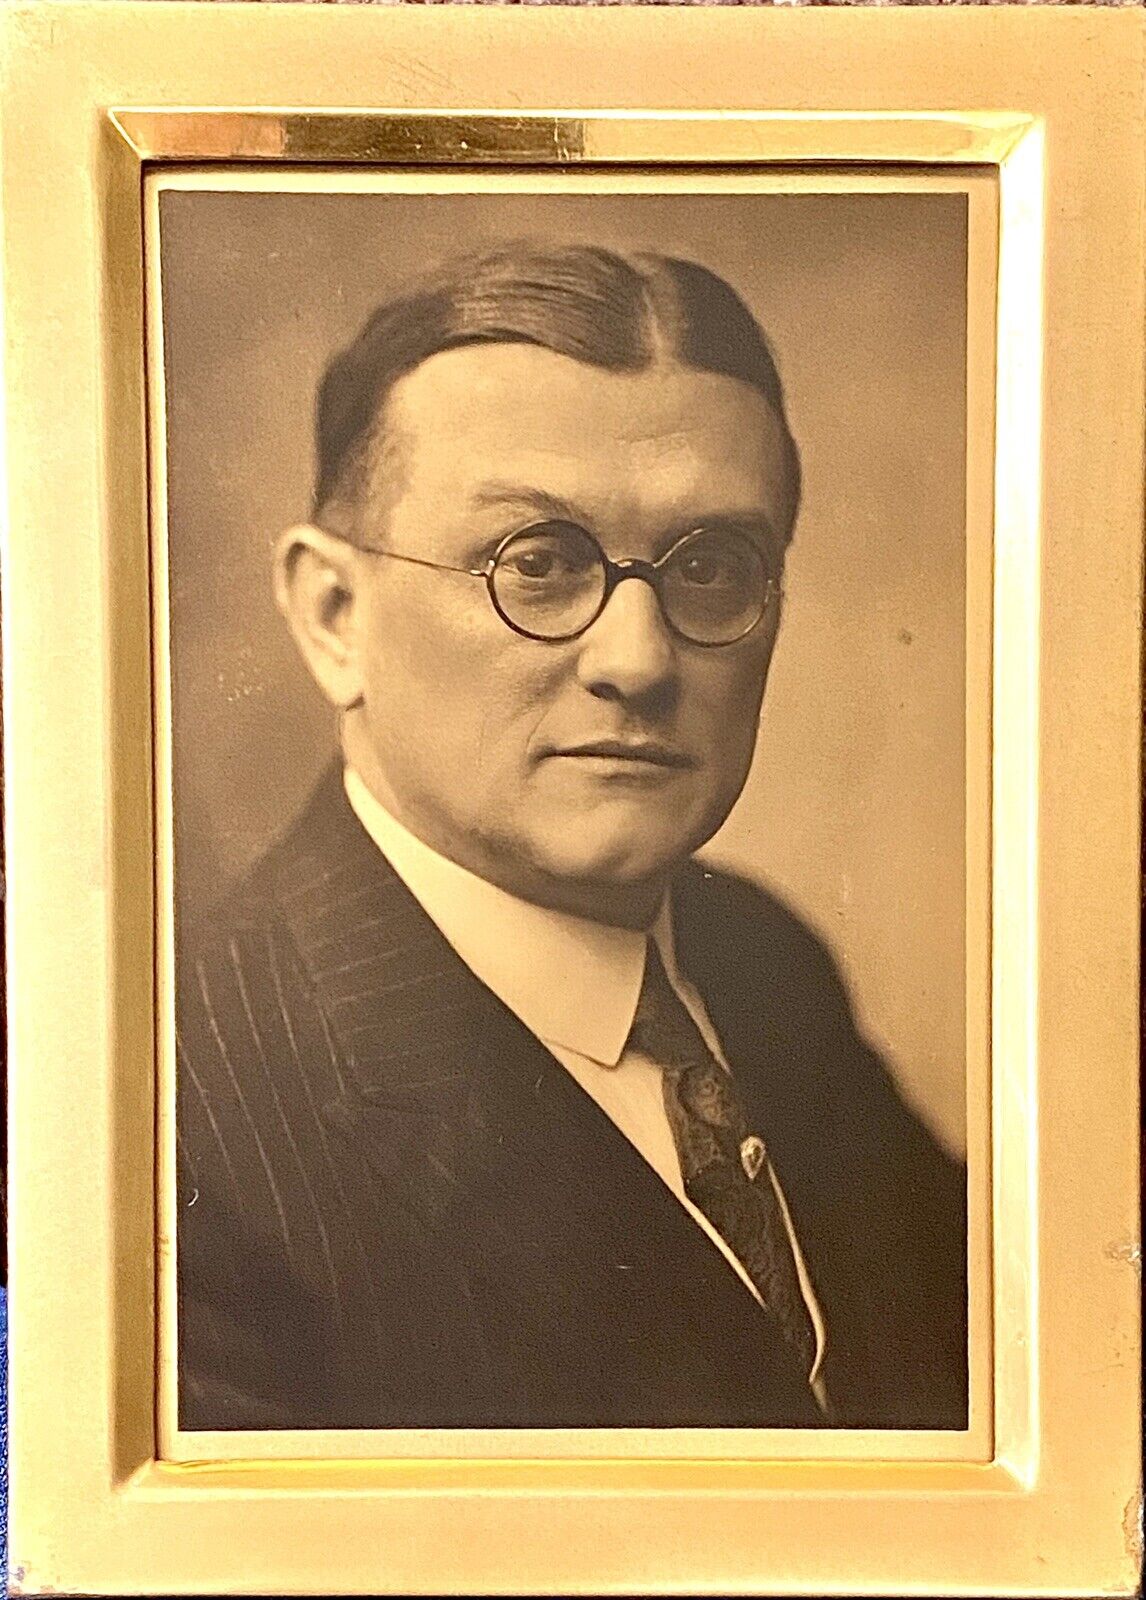 Tin Type Photo Antique Charles Henry Grakelow 1930’s Co-Developer of FTD FLORIST